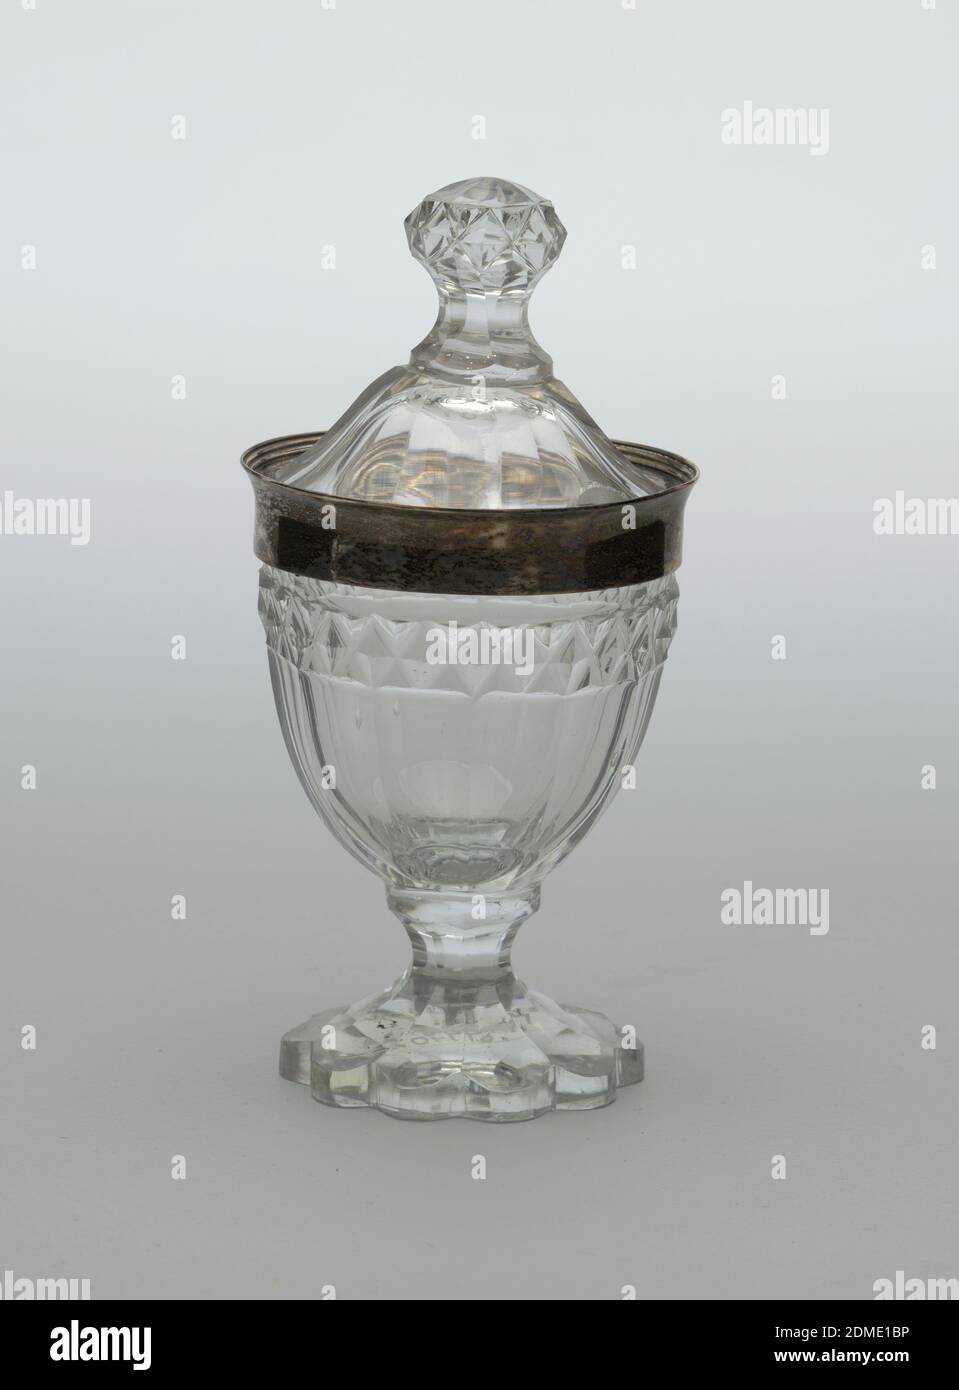 Jar and cover, Henry Chawner, 1764 – 1851, glass, silver, Flattened urn-shaped body on tall faceted flaring foot with scalloped edge;sides of body fluted, a band of diamonds above, above that a band of silverwith slightly everted lip; high domed cover with faceted sides and finial cut with diamonds, notch cut out of rim for spoon., London, England, ca. 1795, glasswares, Decorative Arts, Jar and cover Stock Photo